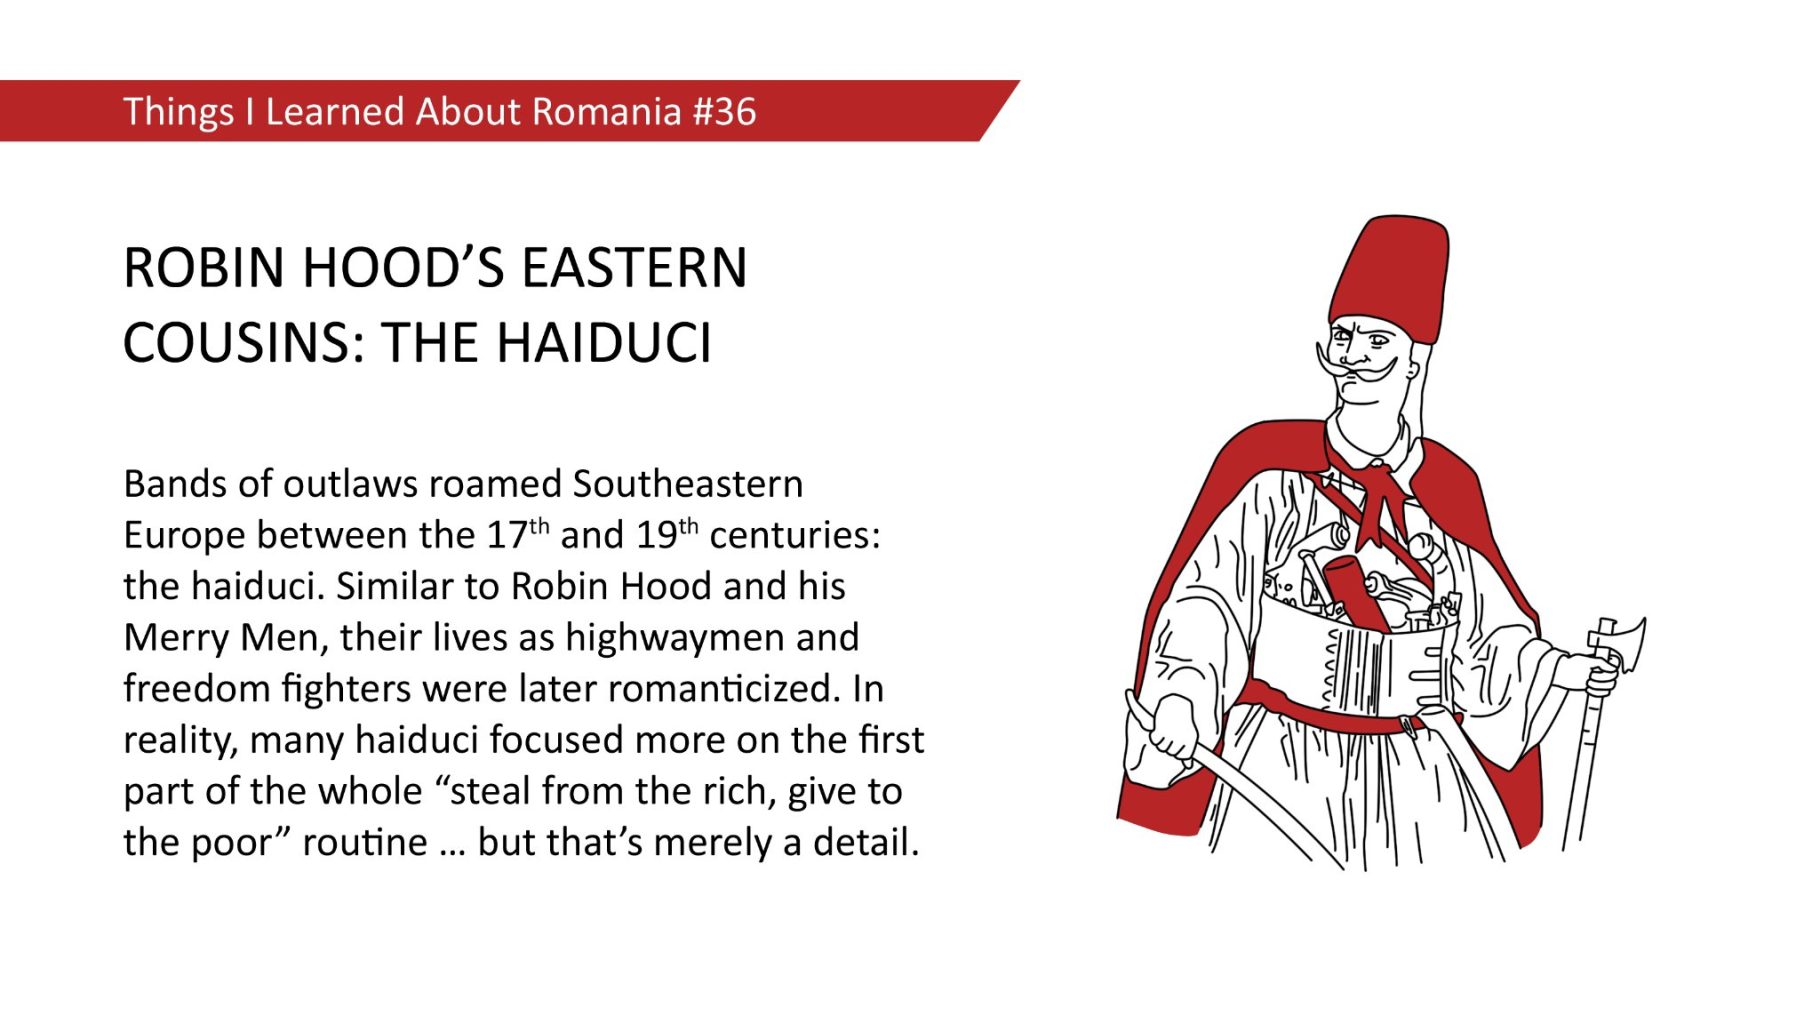 ROBIN HOOD'S EASTERN COUSINS: THE HAIDUCI - Bands of outlaws roamed Southeastern Europe between the 17th and 19th centuries: the haiduci. Similar to Robin Hood and his Merry Men, their lives as highwaymen and freedom fighters were later romanticized. In reality, many haiduci focused more on the first part of the whole "steal from the rich, give to the poor" routine ... but that's merely a detail.